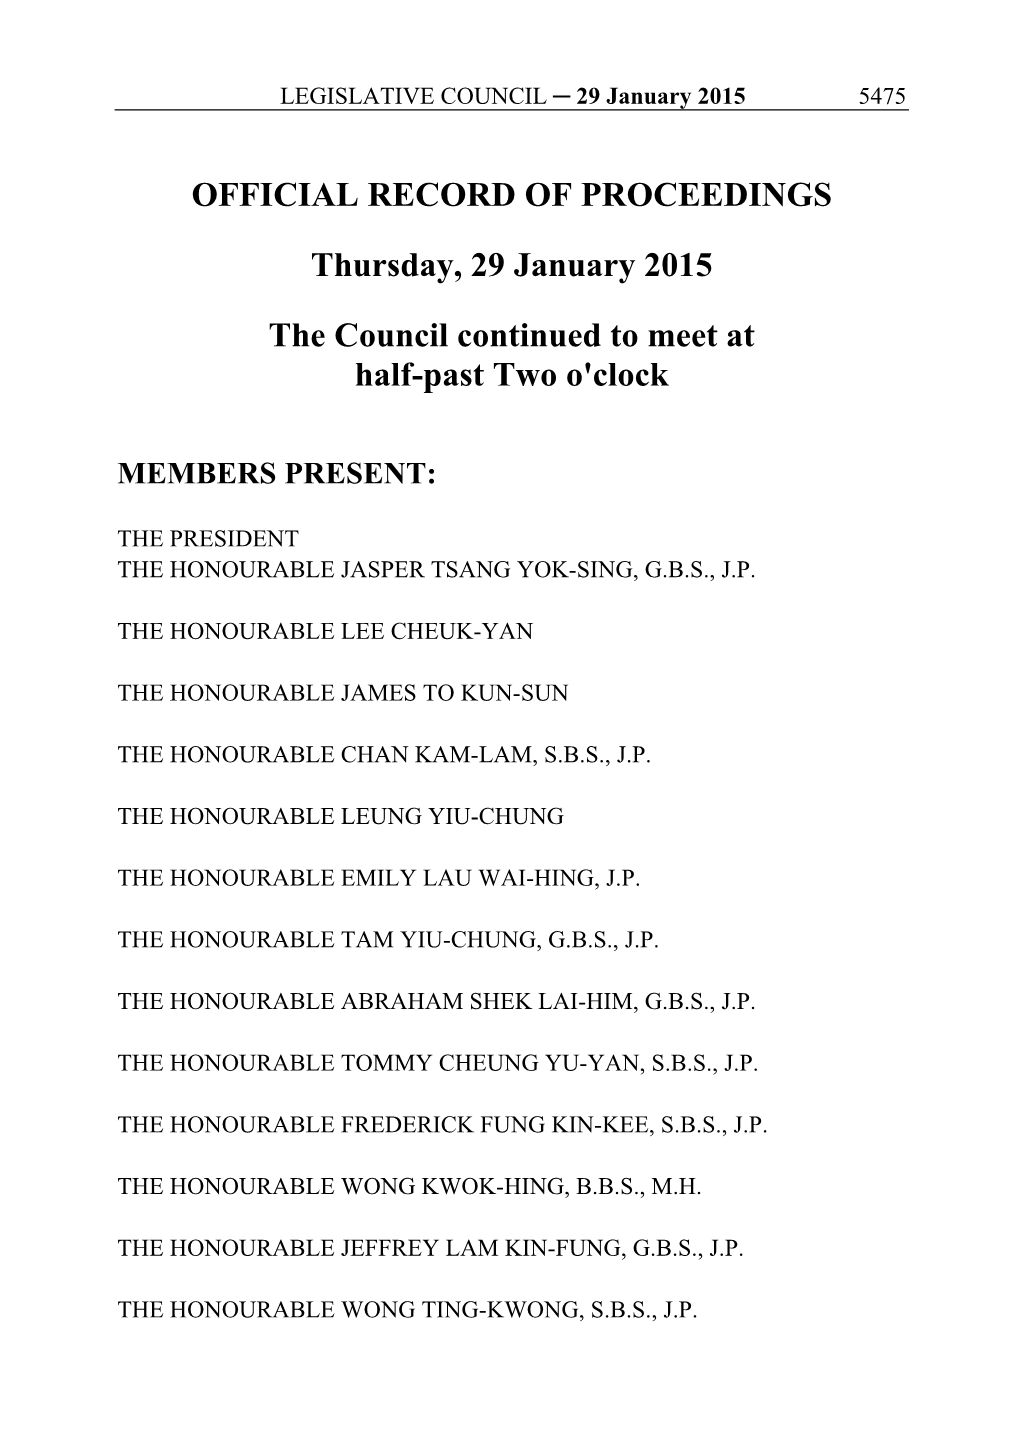 OFFICIAL RECORD of PROCEEDINGS Thursday, 29